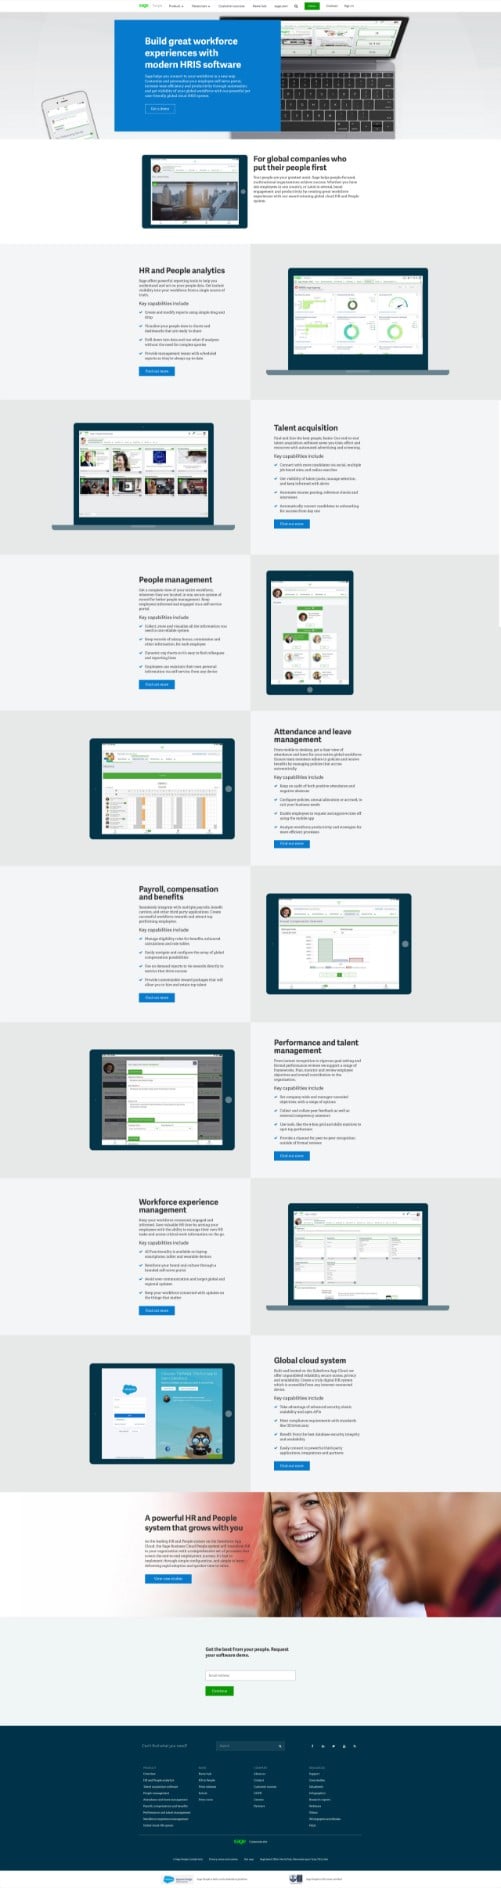 Sagepeople product pages